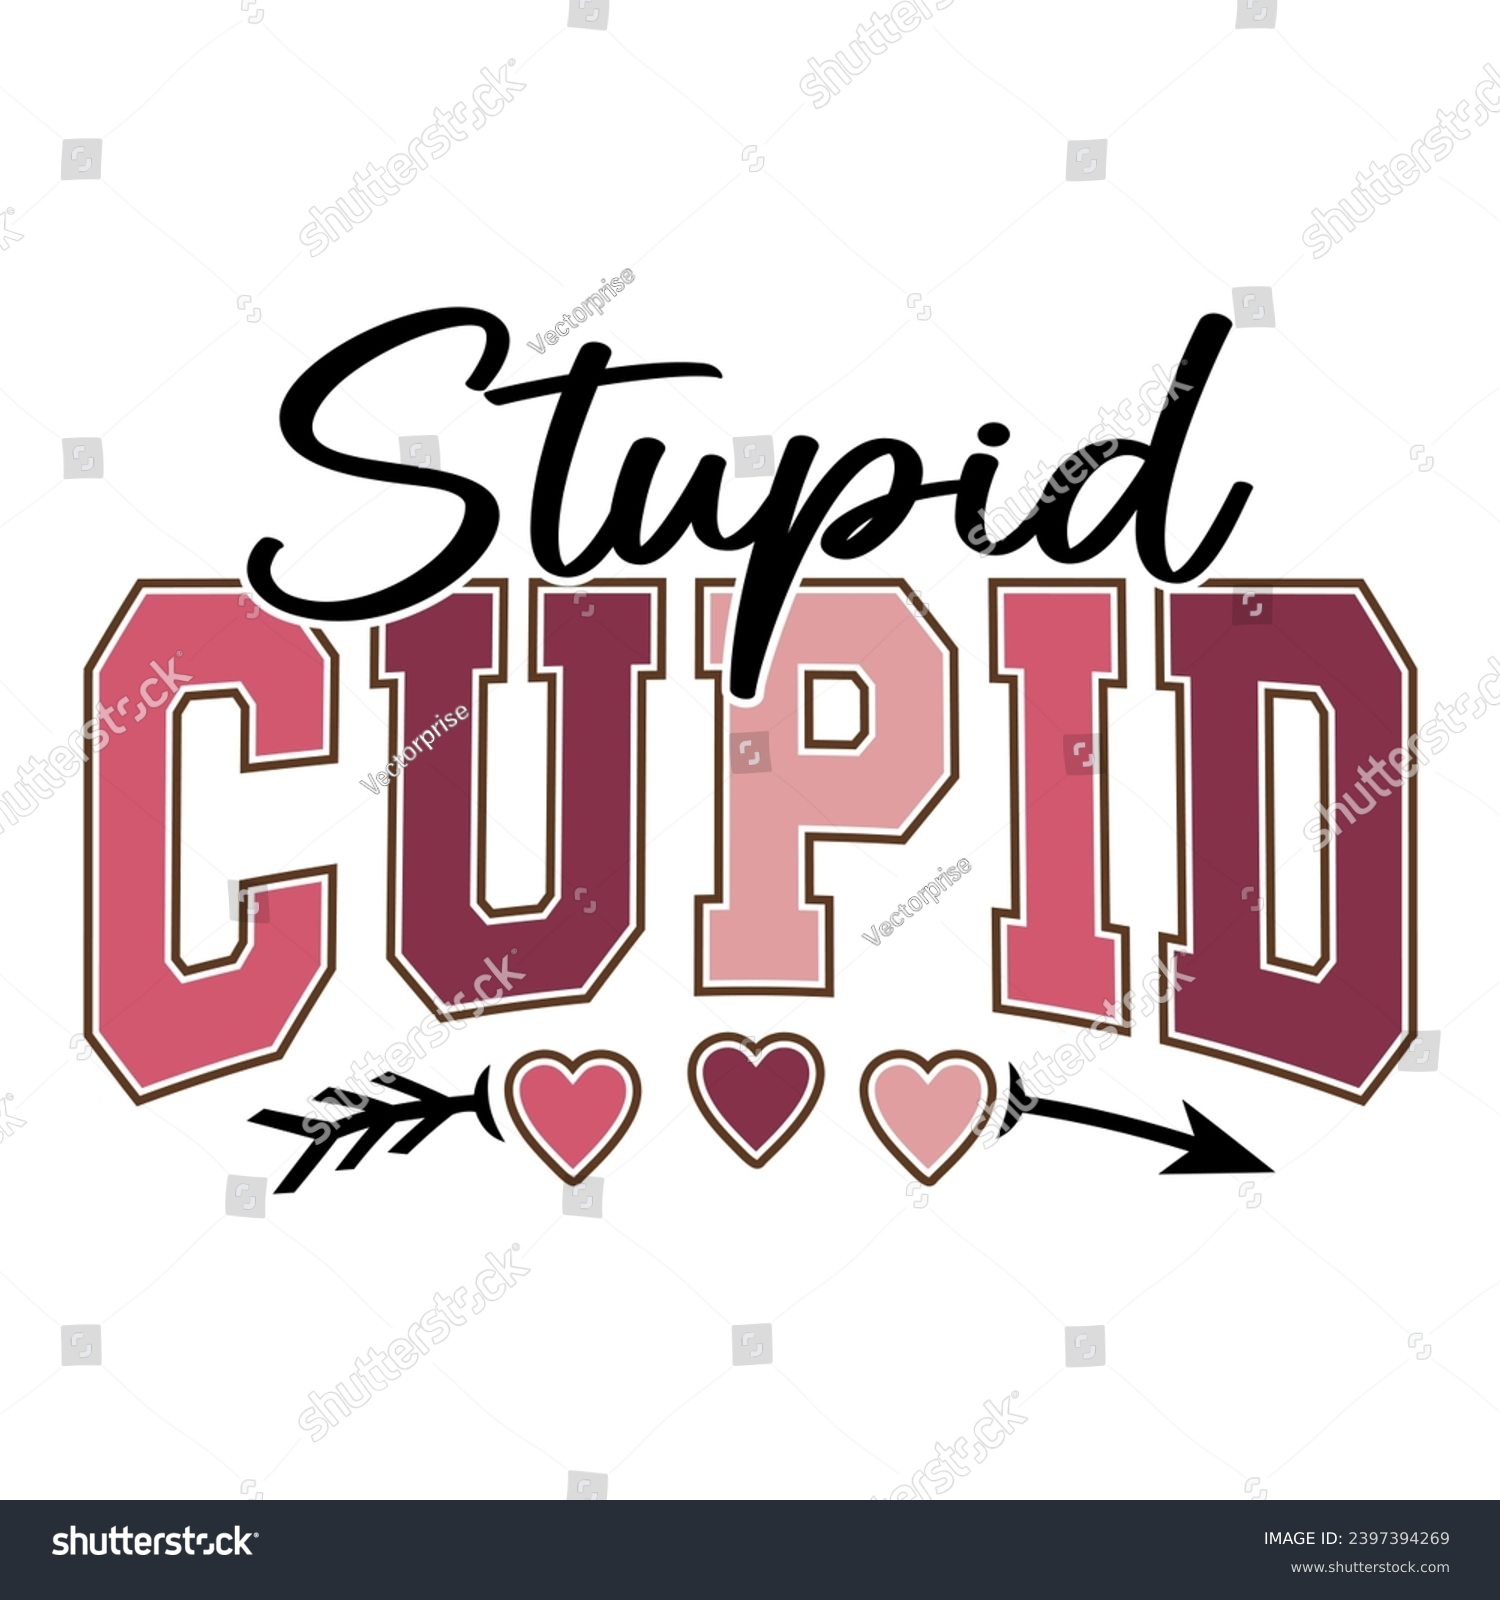 SVG of Stupid Cupid, Valentine varsity college text design with hearts for Valentine's Day celebration svg